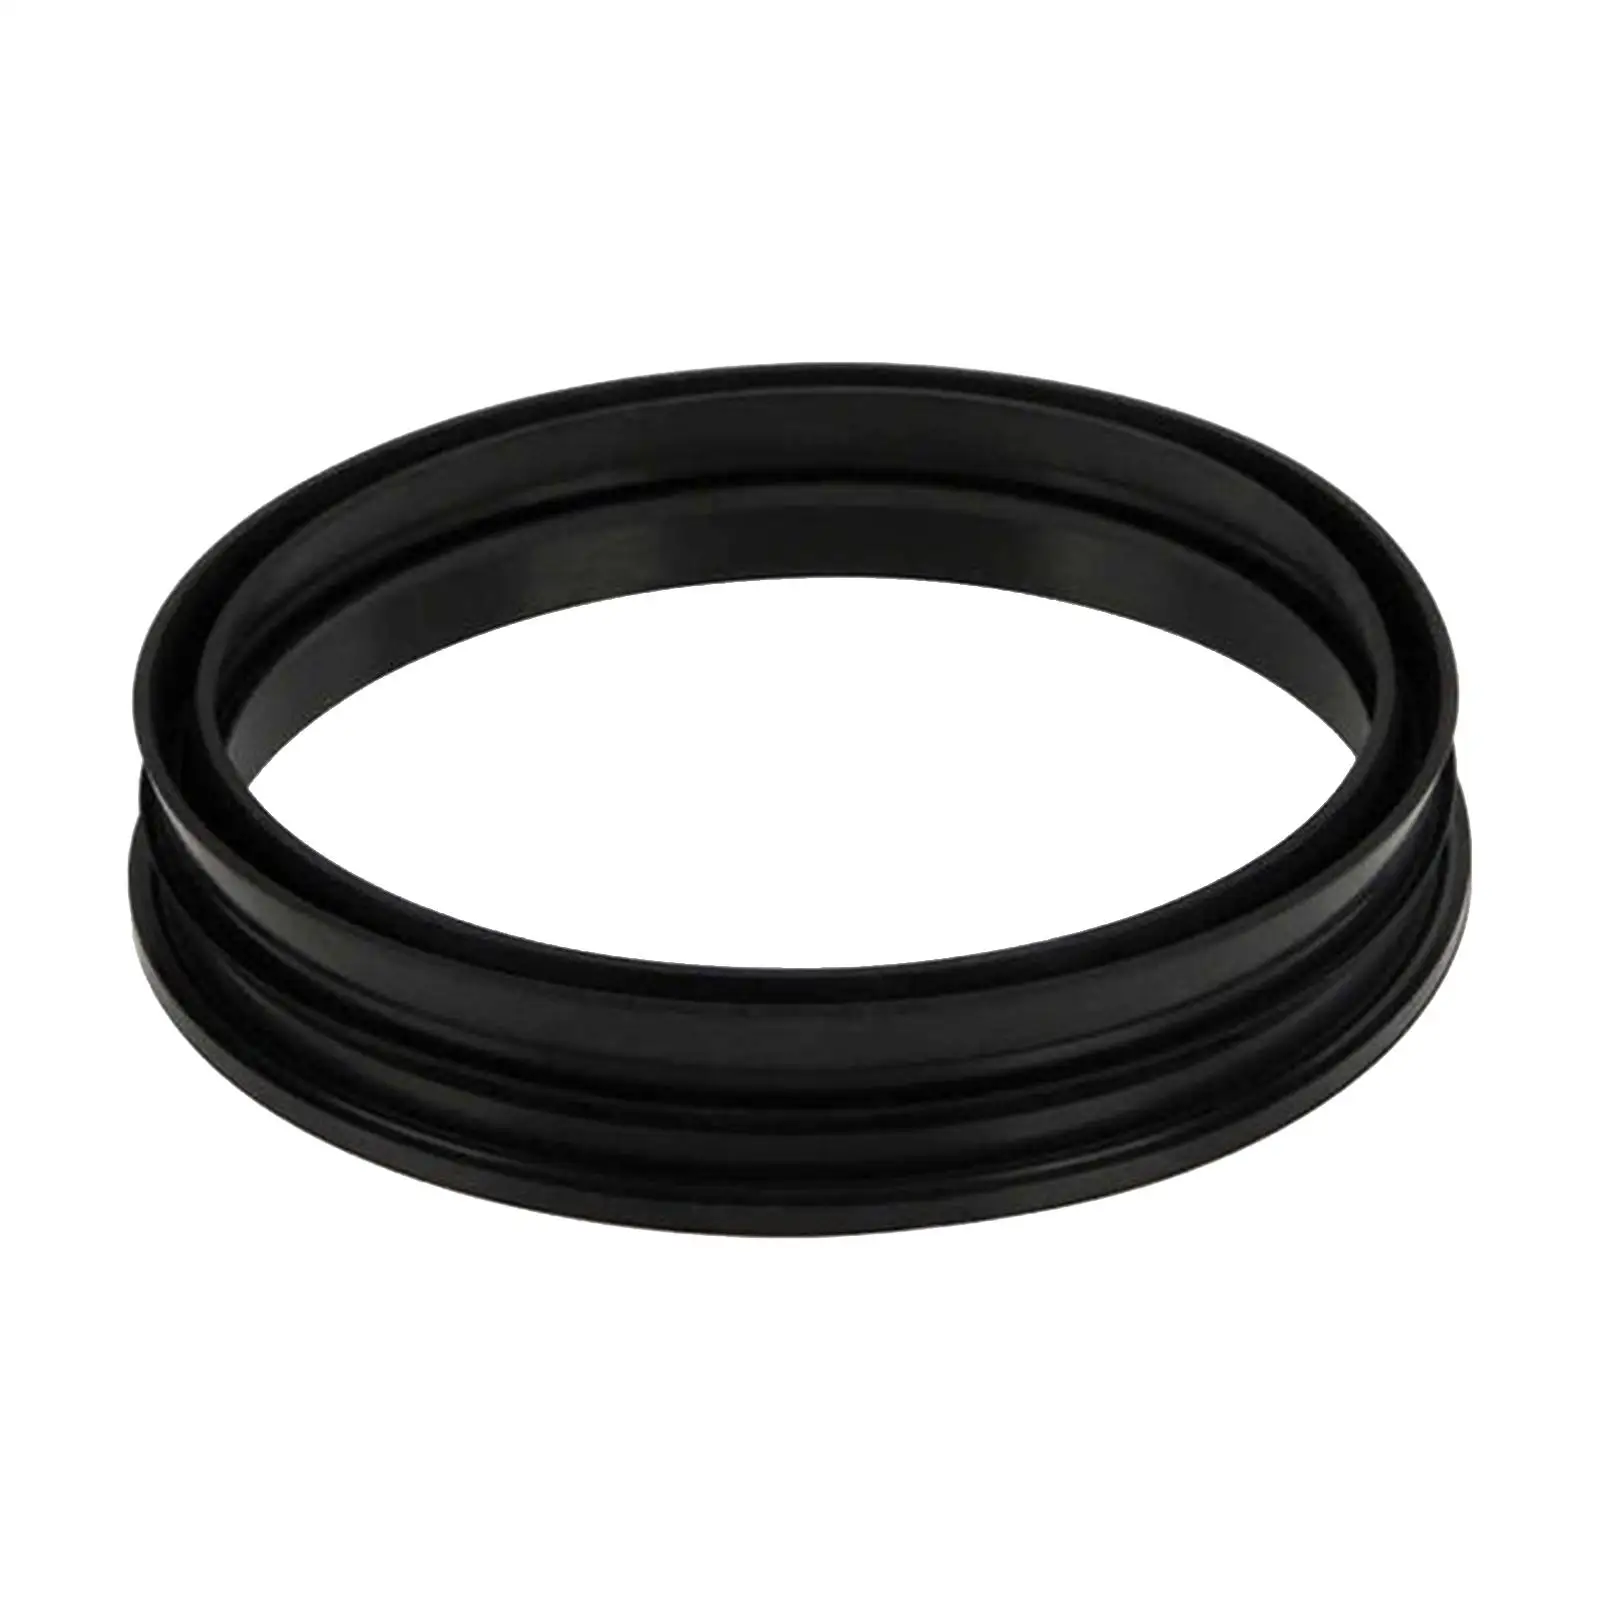 Fuel Tank Pump Seal O Ring 17342-79900 Easy to Install for Nissan Black